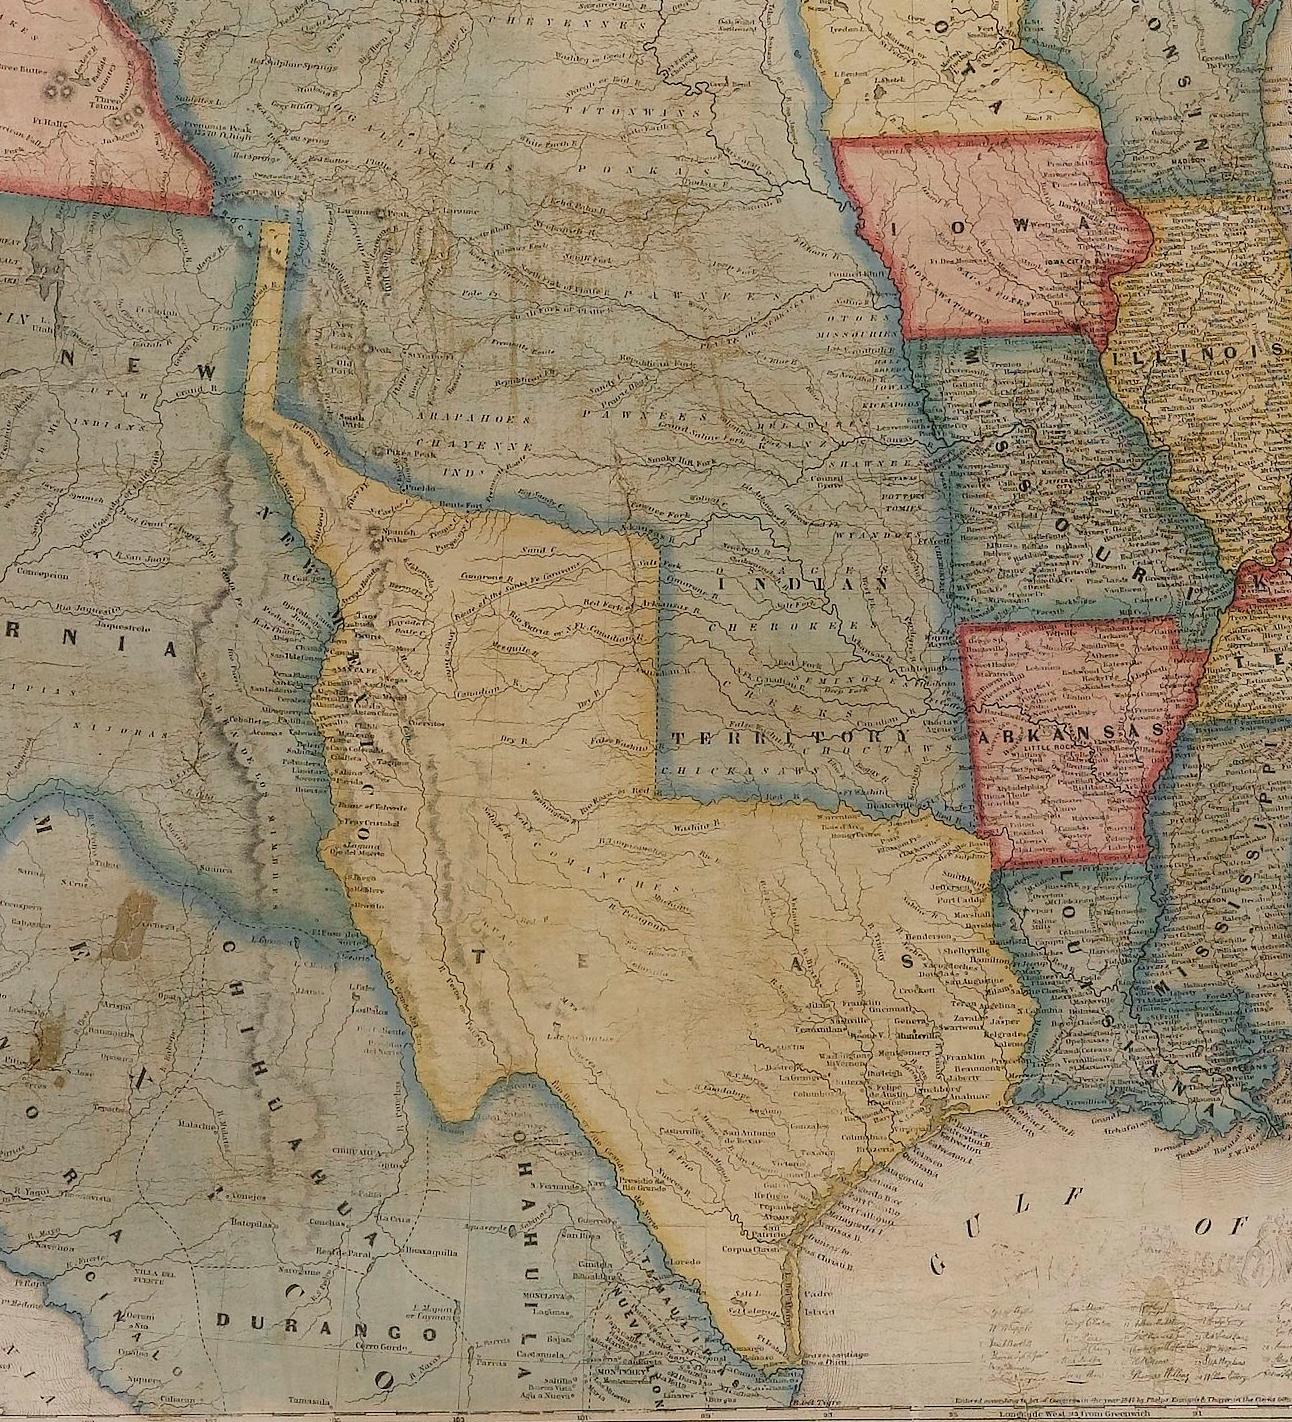 Offered is a scarce map of the United States and Mexico by Ensign and Thayer, dating to 1848. This pictorial map features a unique view of the U.S. with exquisite hand-coloring and well-defined territory borders. The map is one of the few to